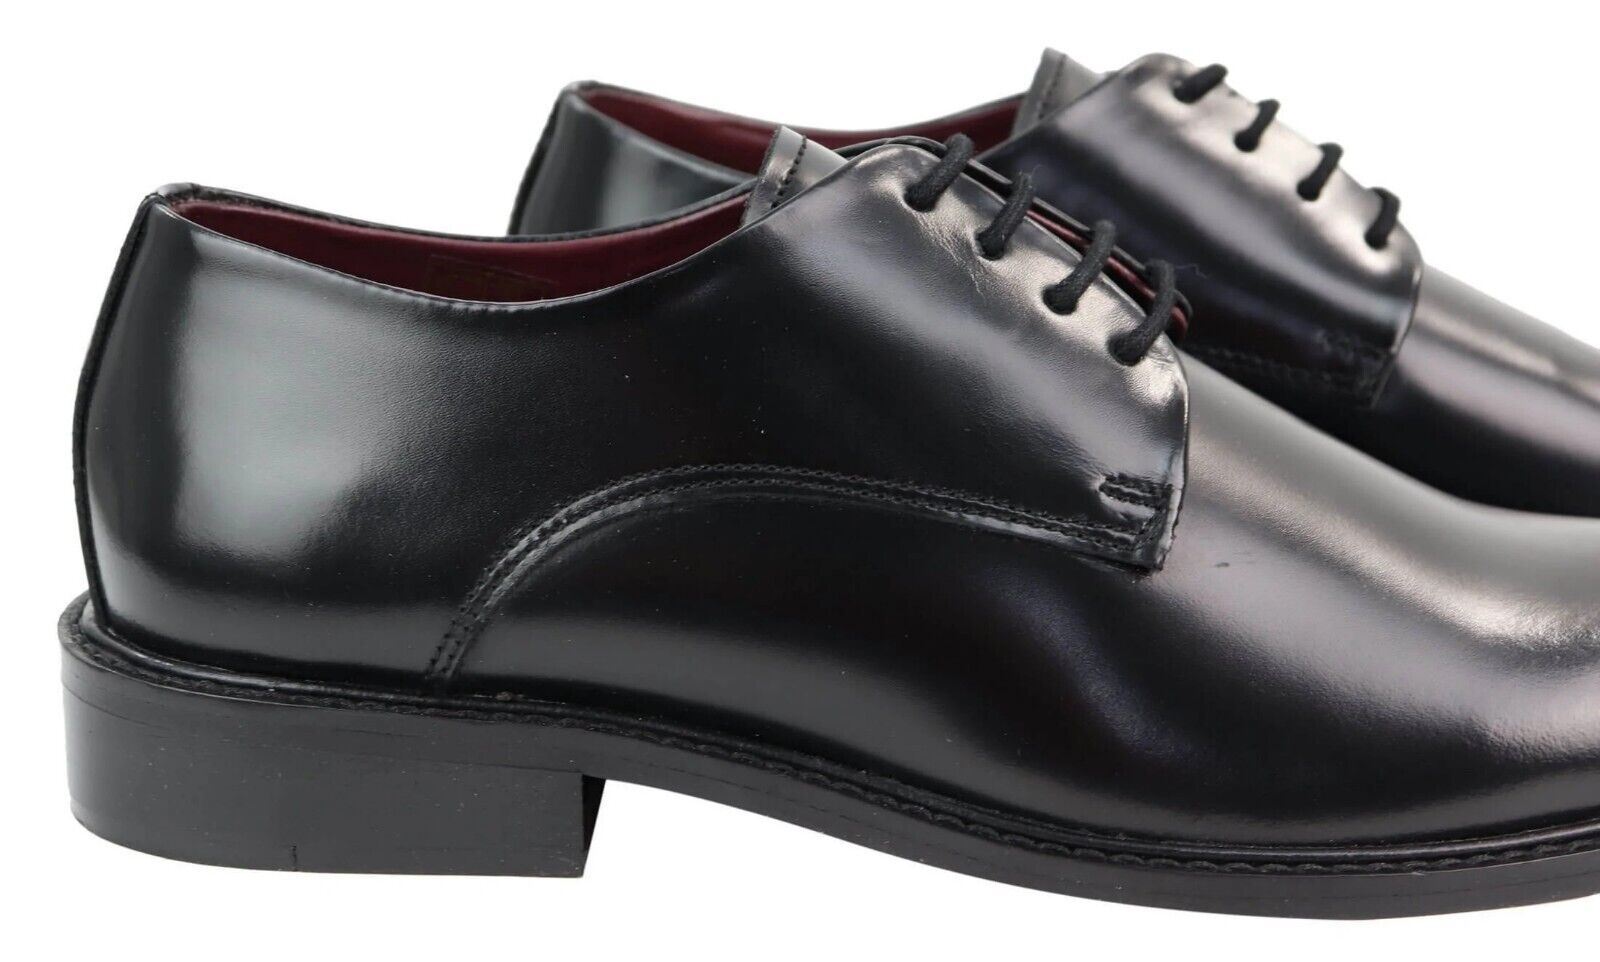 Mens Retro Oxford Brogue Derby Shoes in Black Patent Leather - Upperclass Fashions 